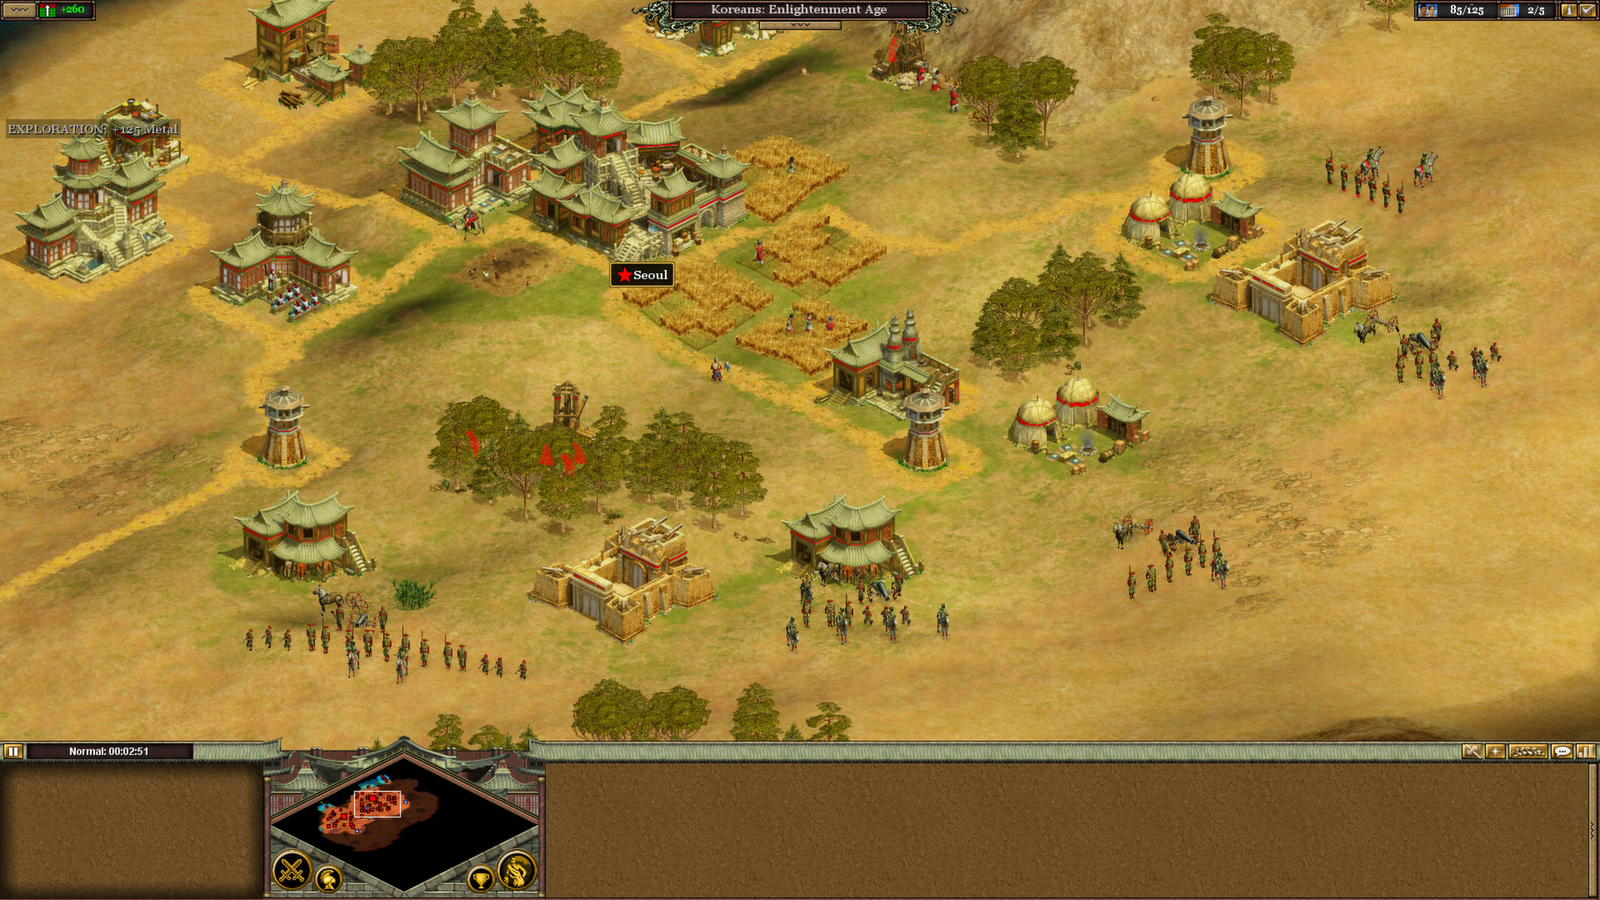 Rise of Nations Wiki